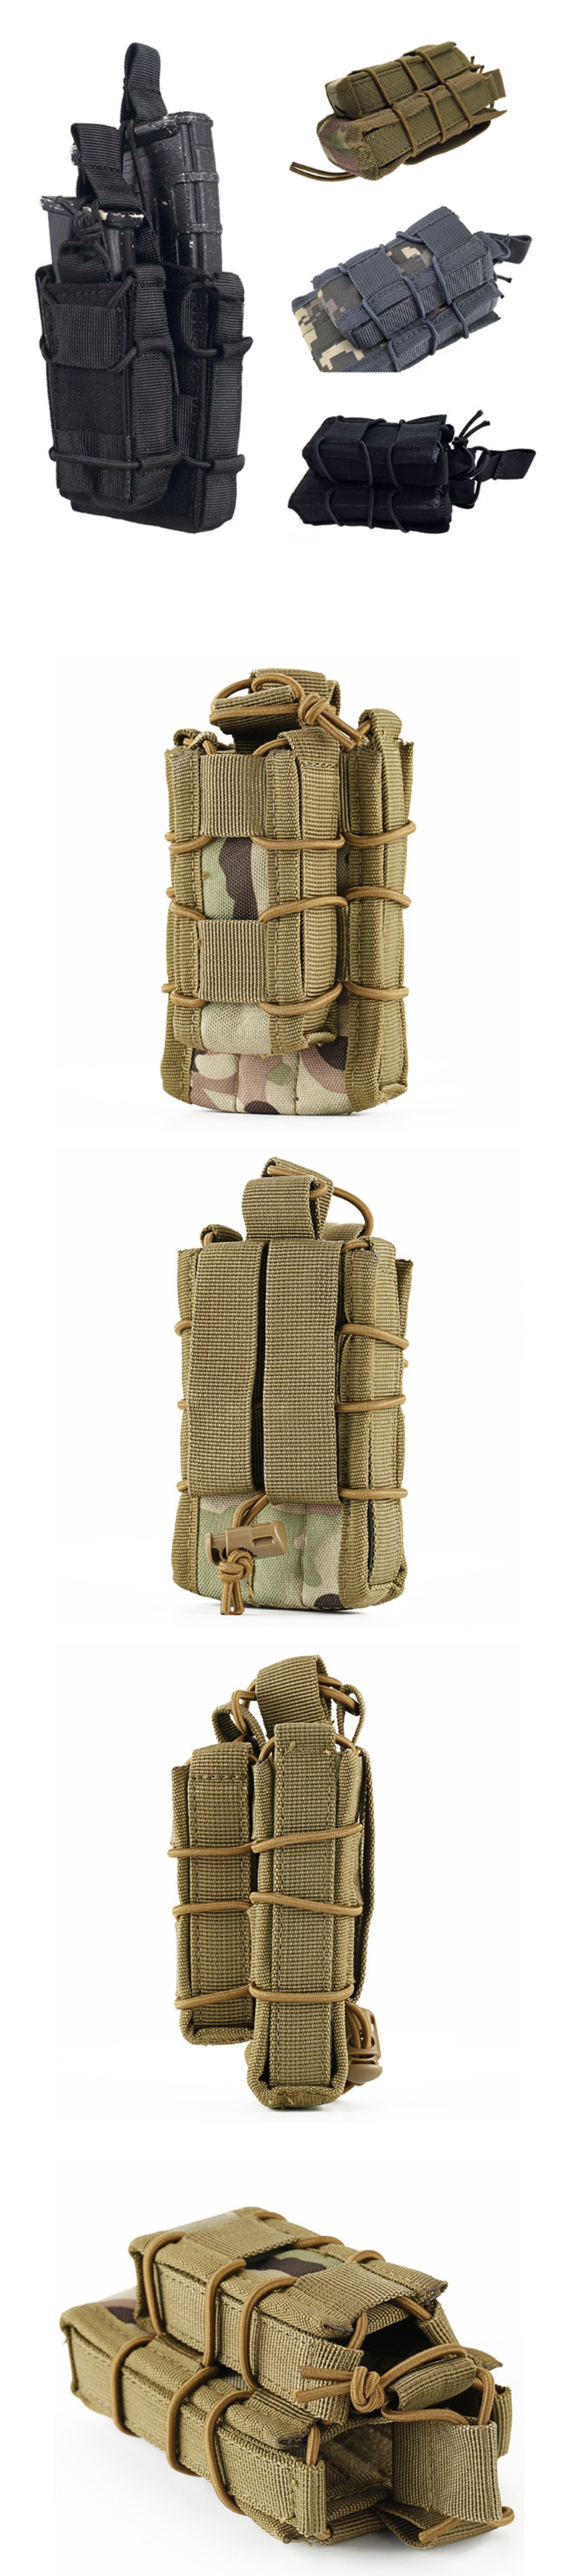 ZANLURE-Twice-Magazine-Pouch-Molle-Holder-Accessory-Bag-Tactical-Bag-For-Camping-Hunting-1556381-1